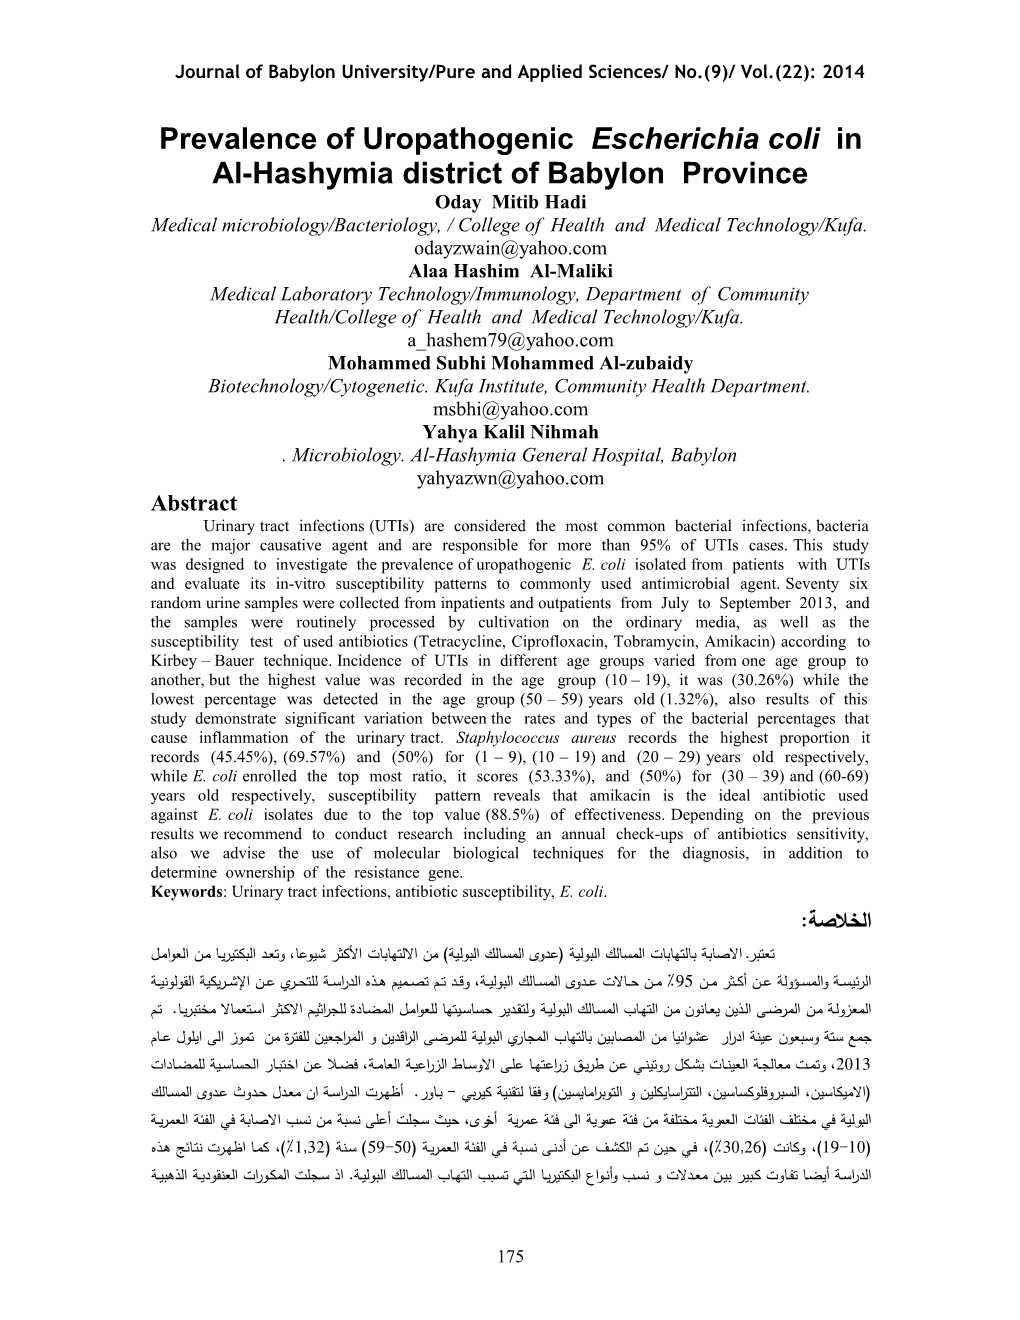 Journal of Babylon University/Pure and Applied Sciences/ No.(9)/ Vol.(22): 2014 s1